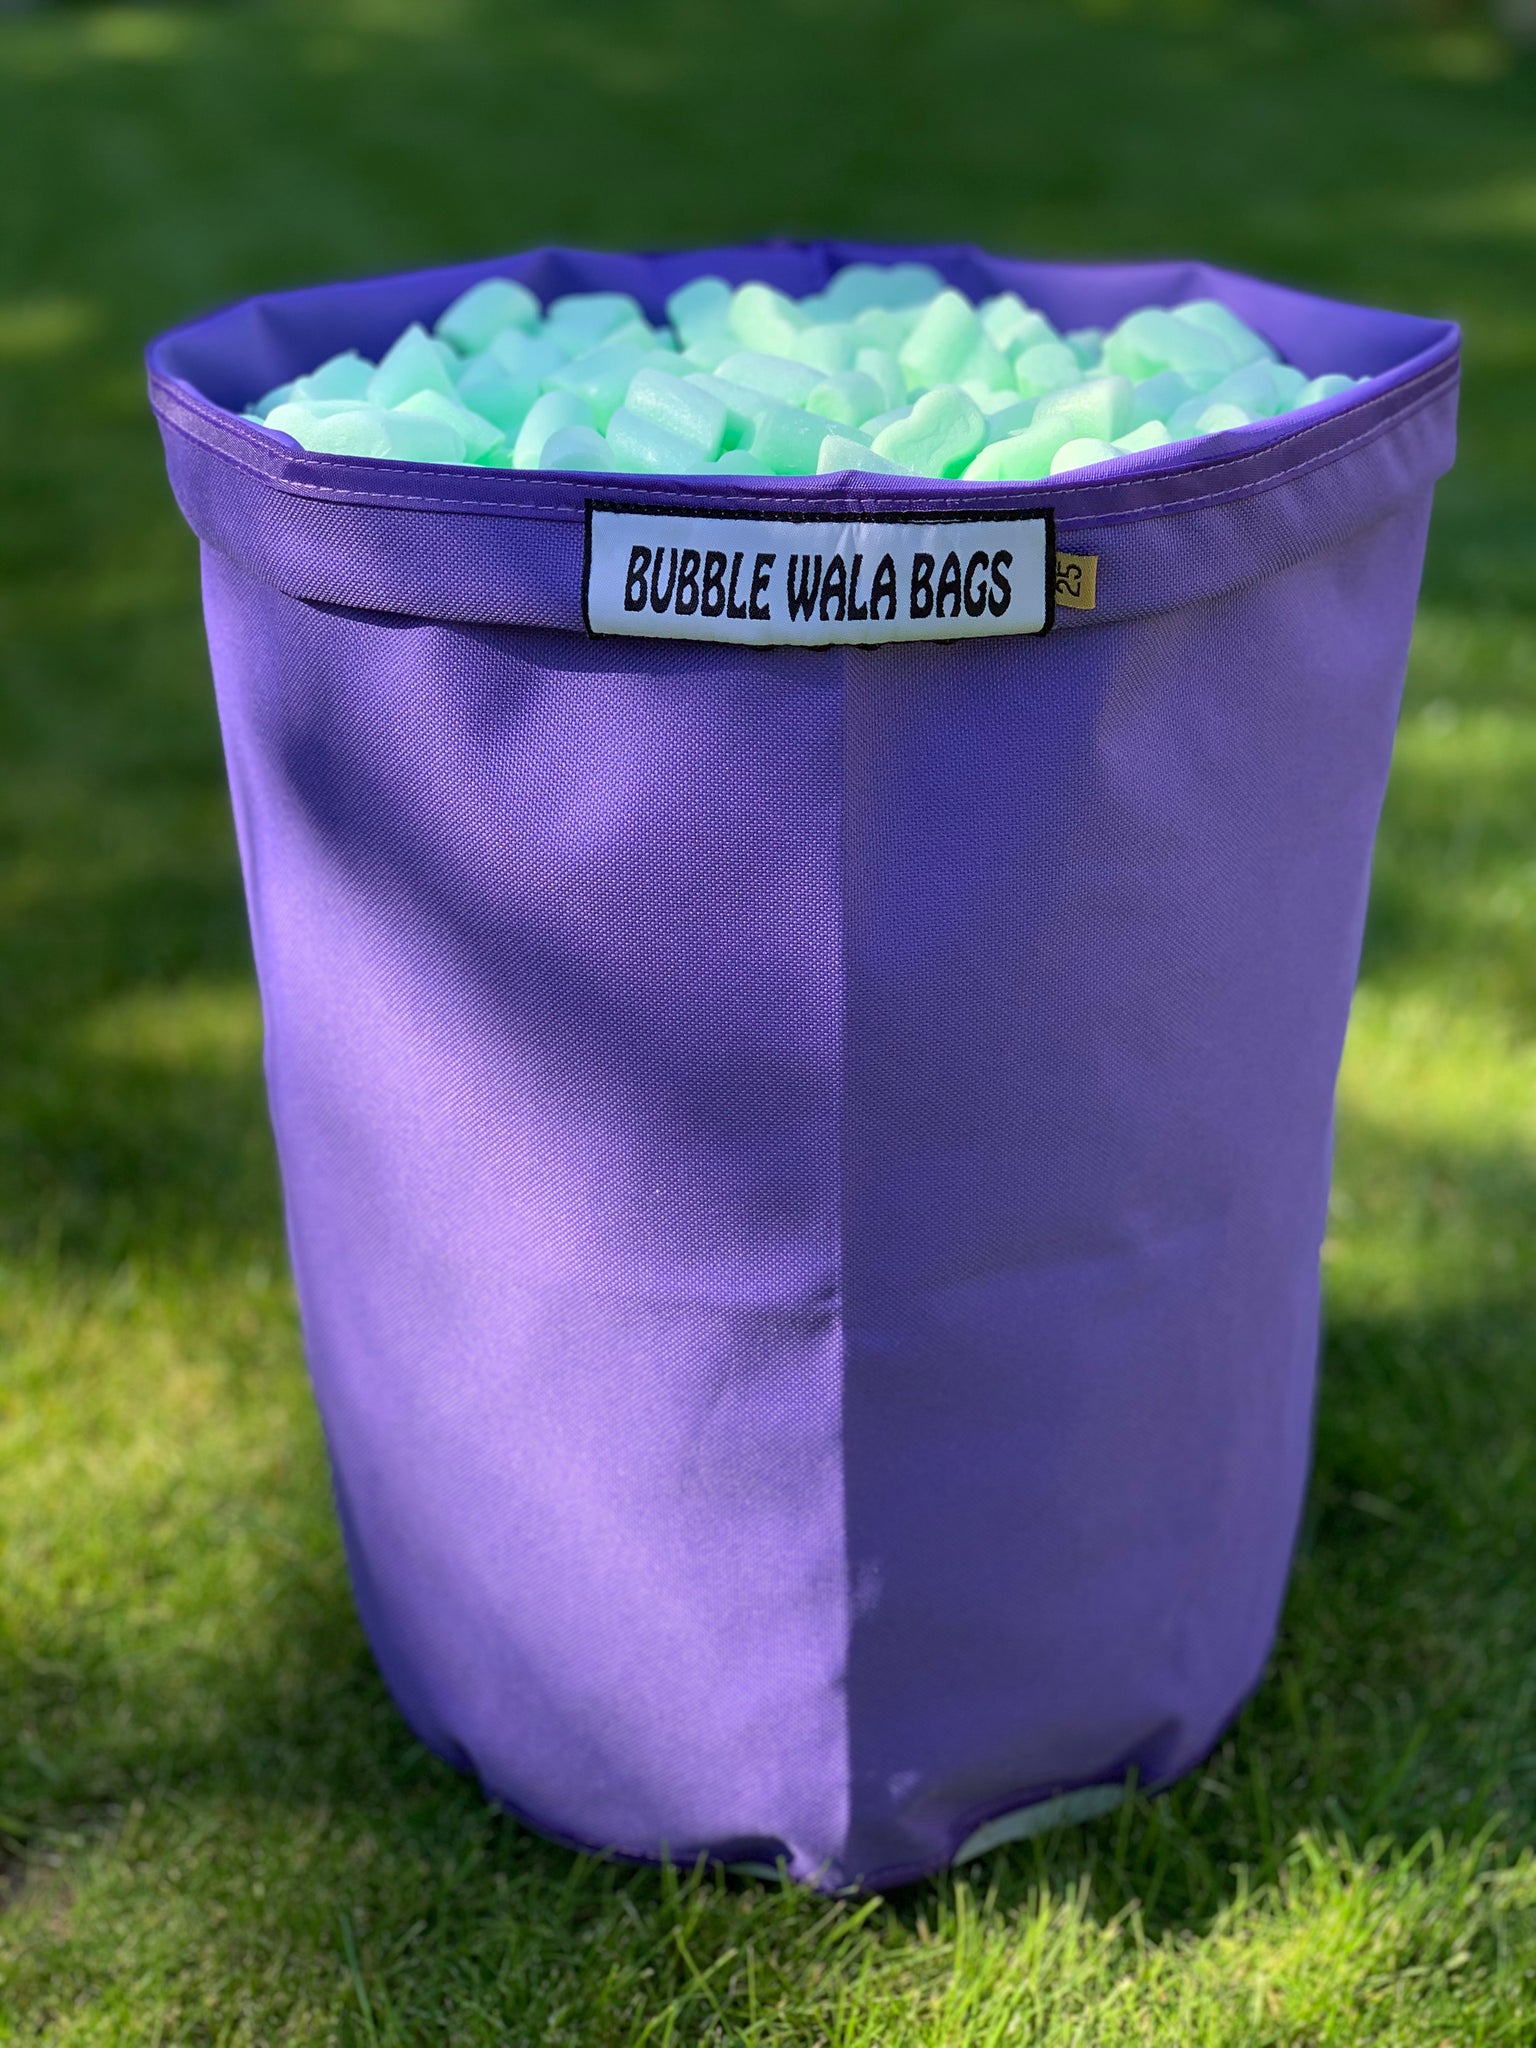 Wholesale Air Bubble Bags,Air Bubble Bags Manufacturer & Supplier from  Ahmedabad India